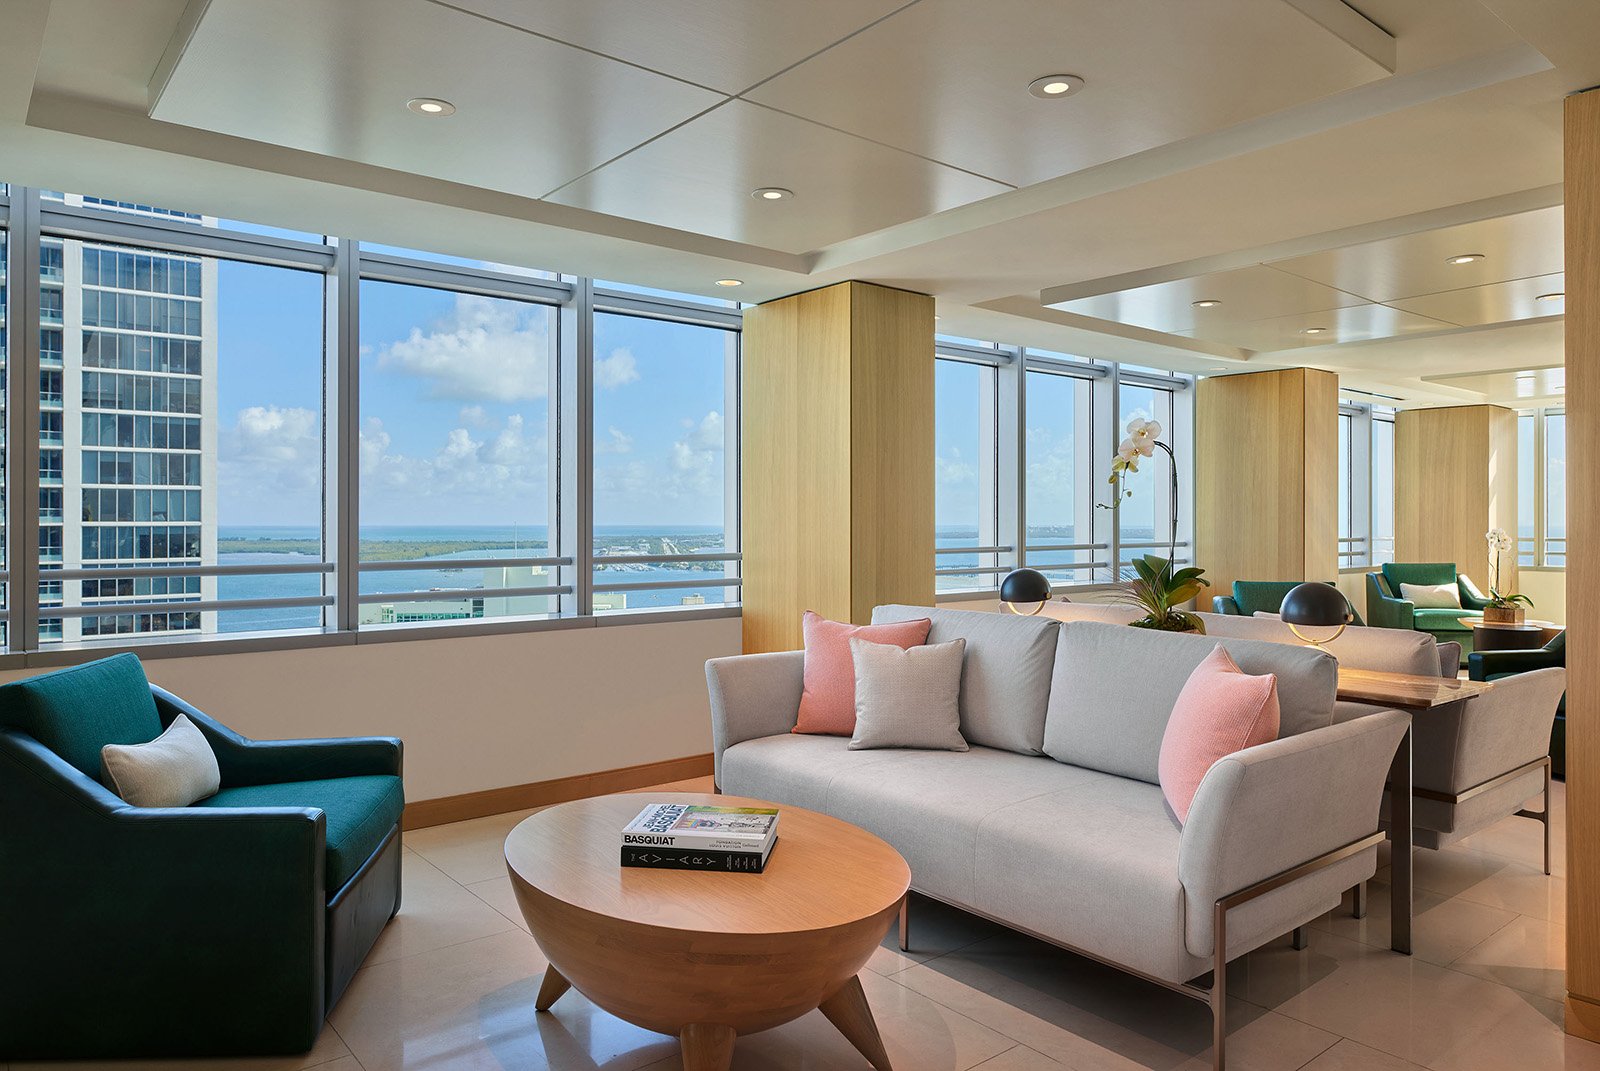 Hotel AKA Brickell Apartment Building Reception Area with Seating